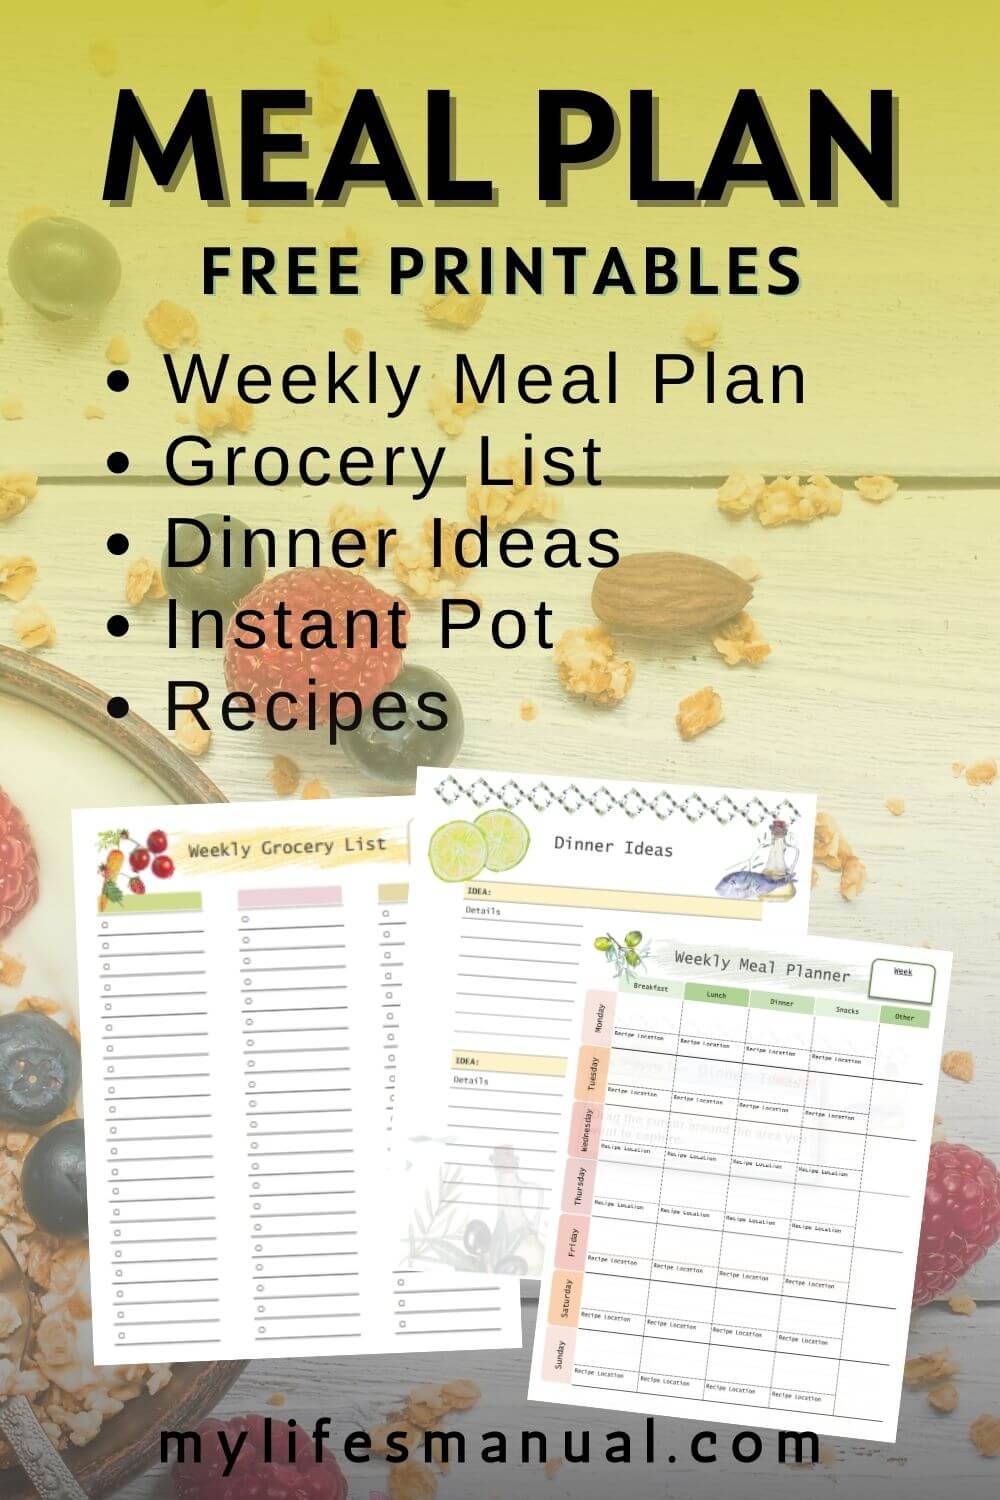 Free Meal Planning Printables - Mylifesmanual